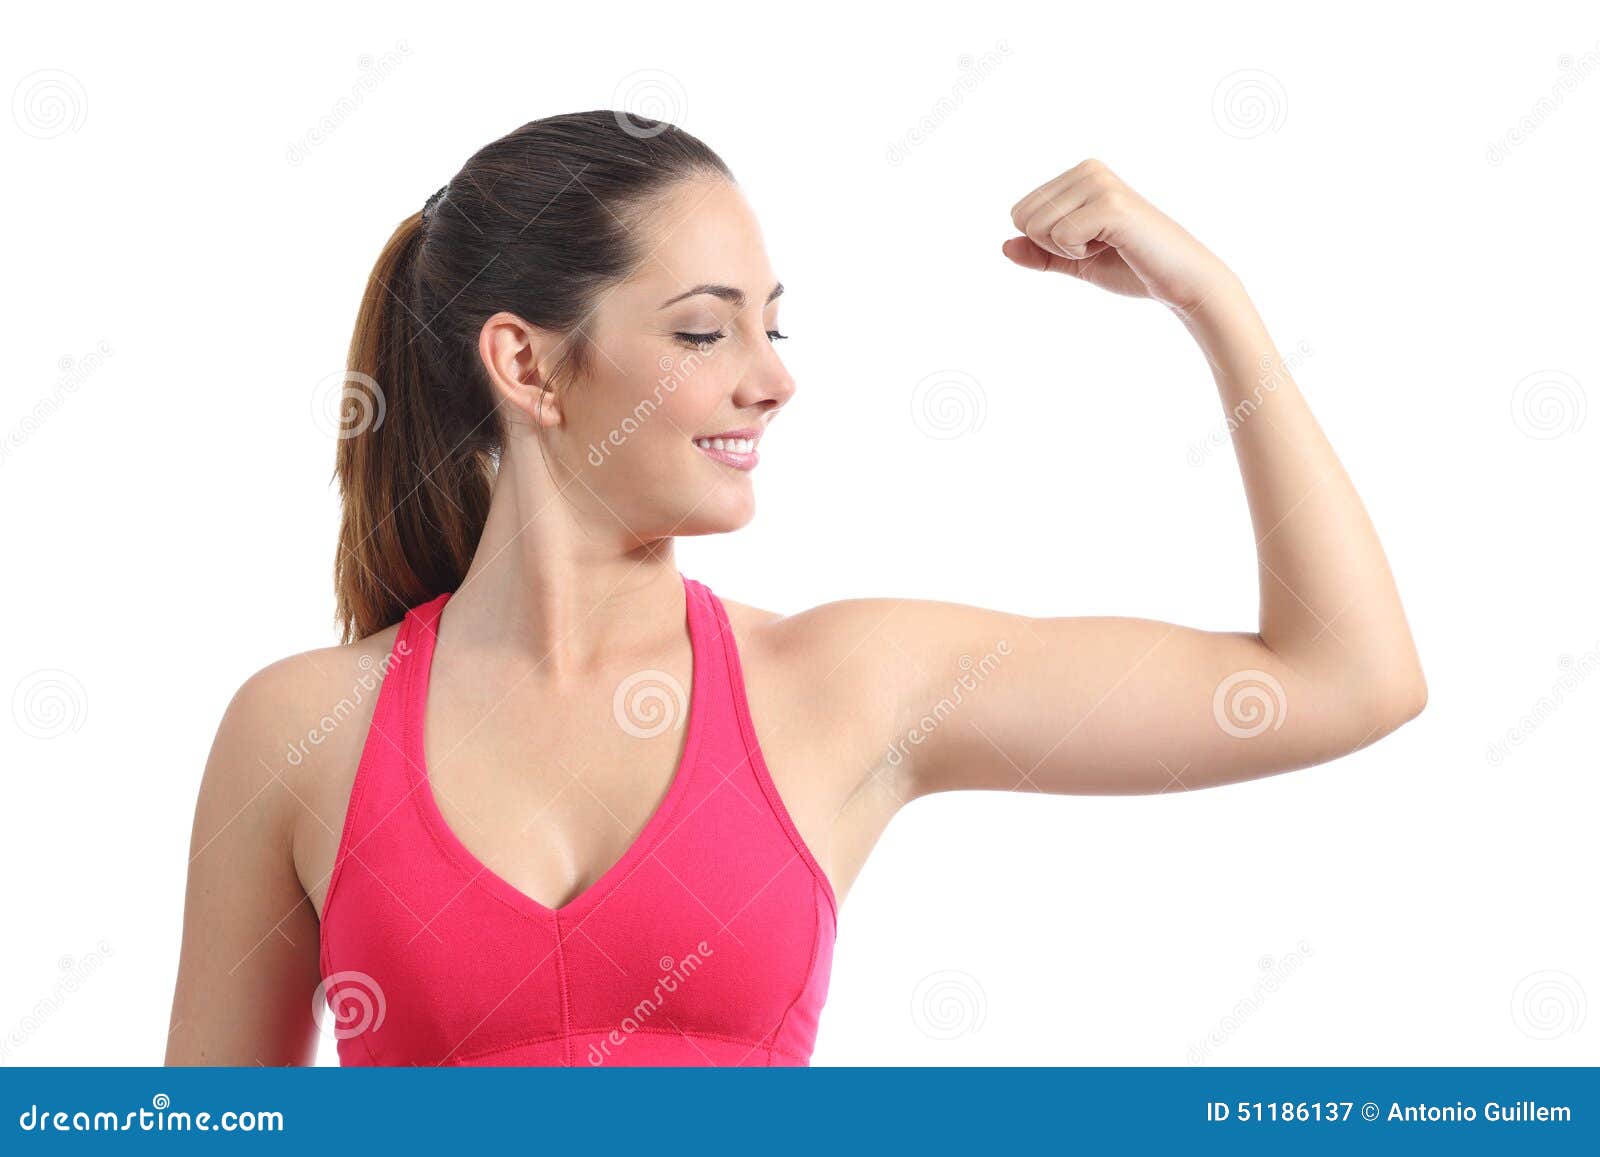 Fitness Woman Looking Her Biceps Muscle Stock Image - Image of attractive,  build: 51186137